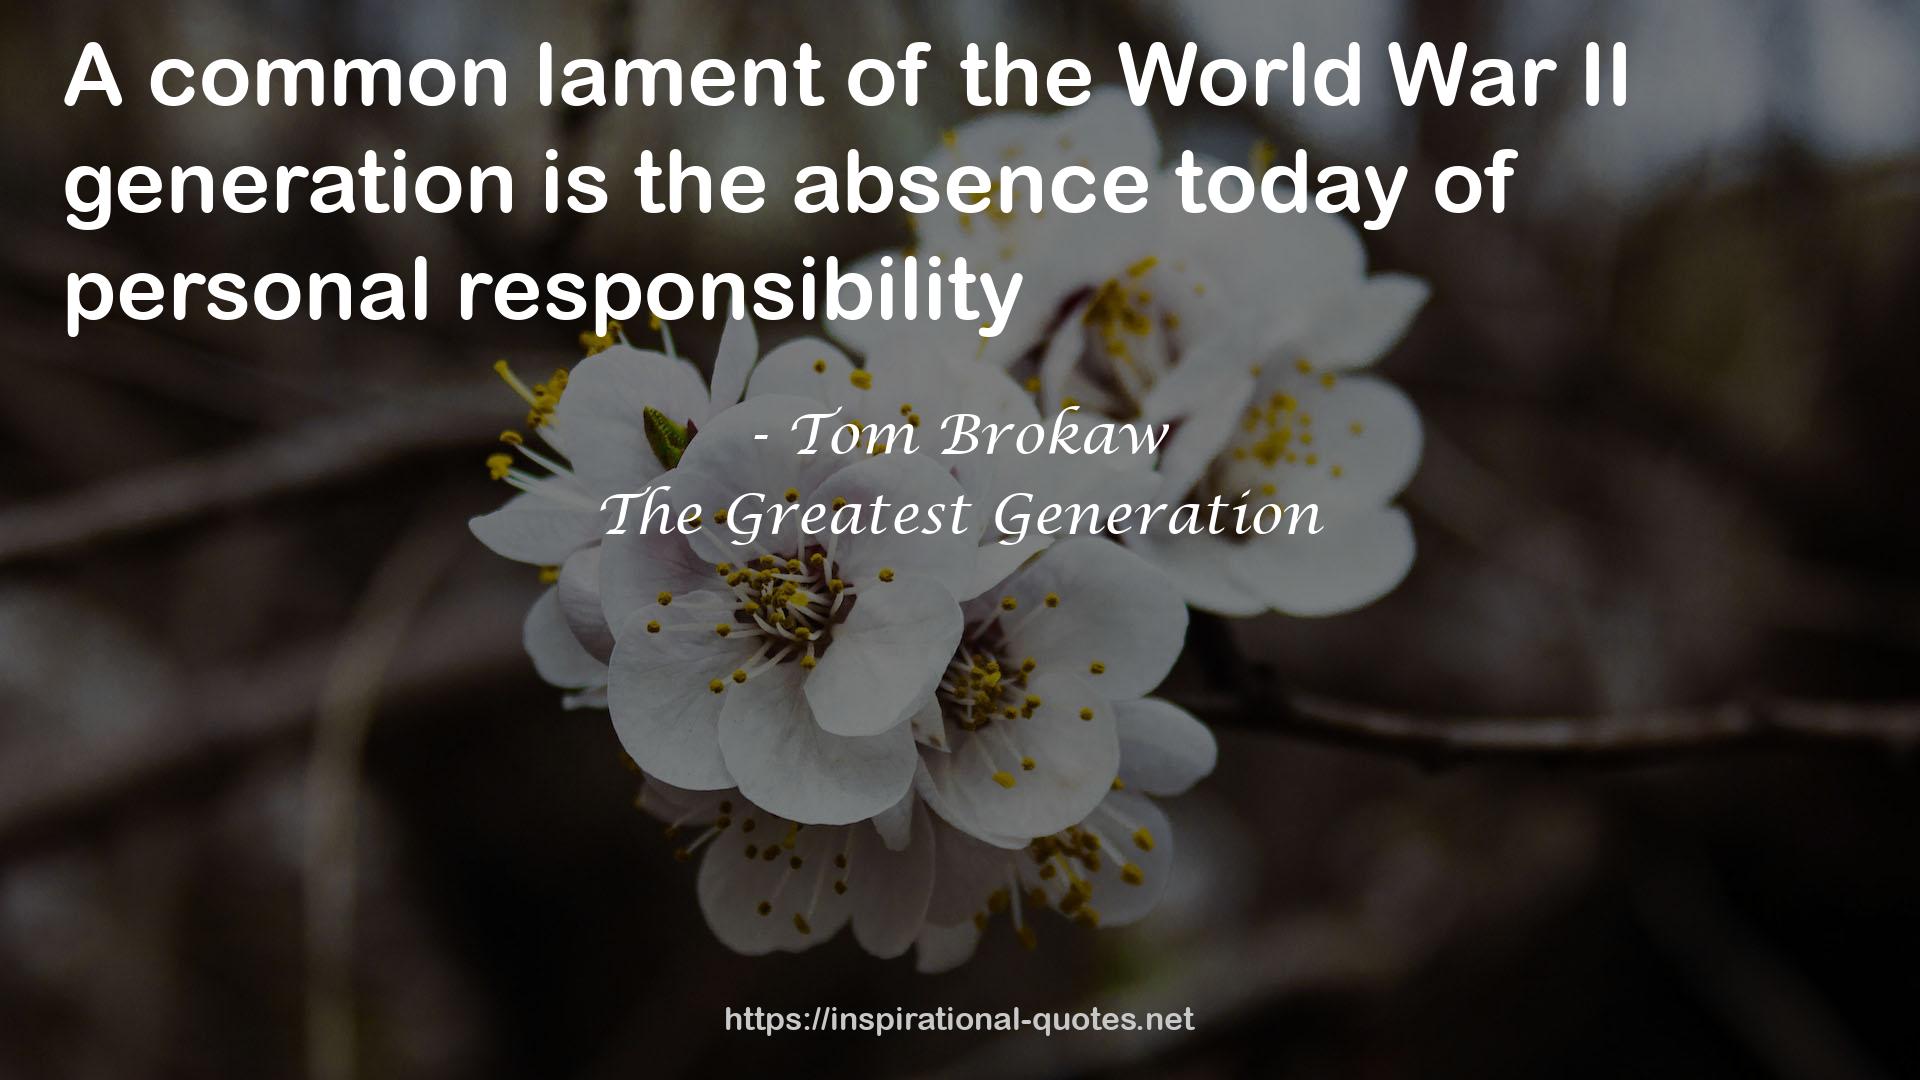 The Greatest Generation QUOTES